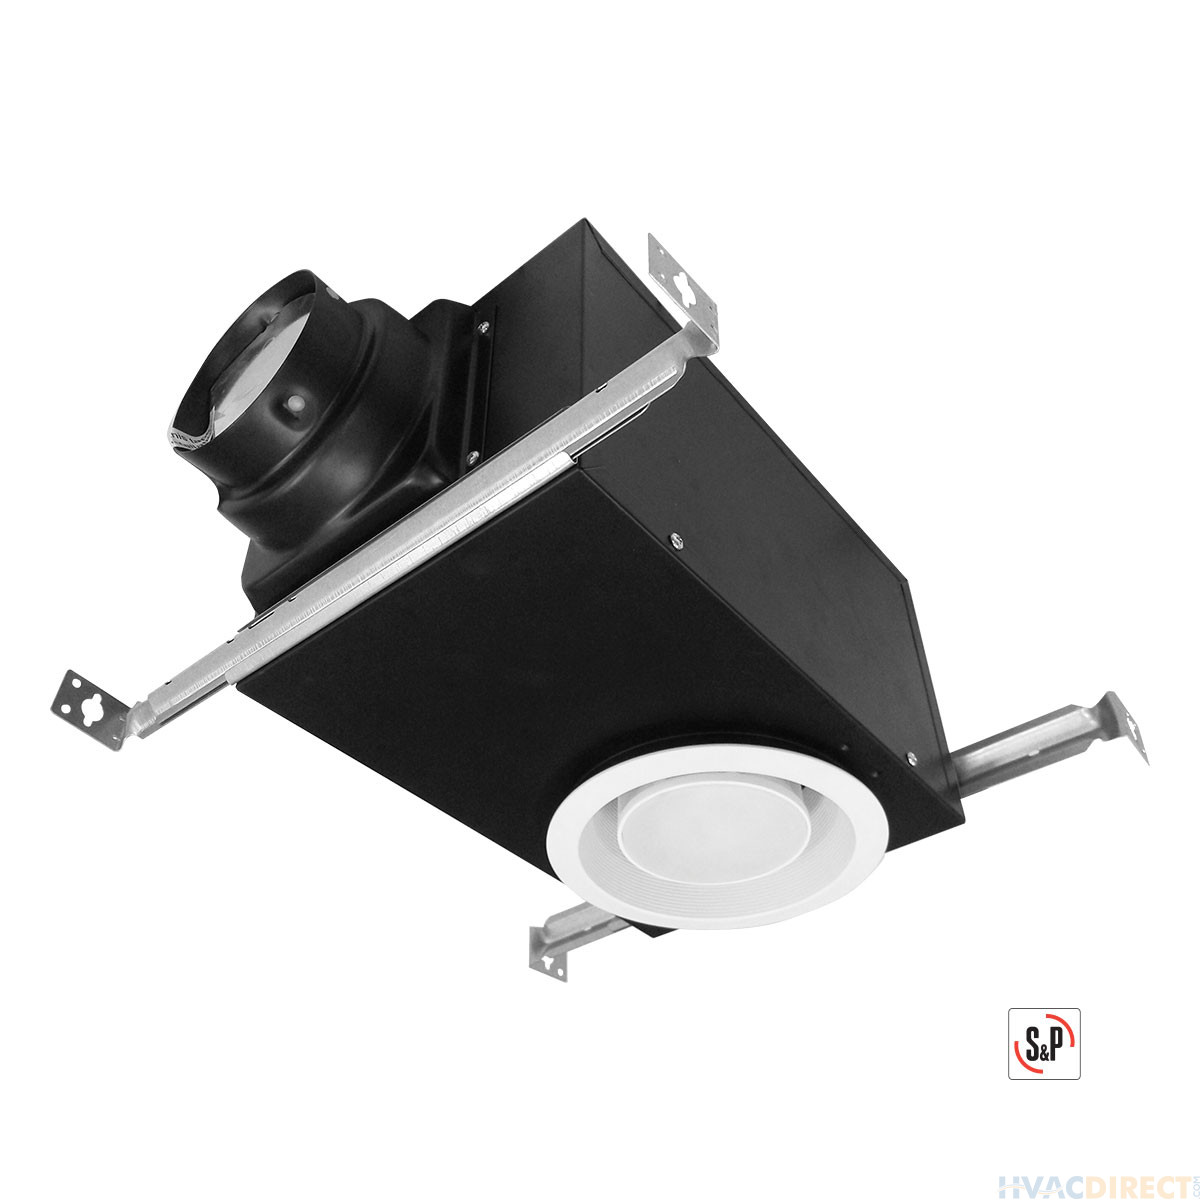 S&P Premium Choice Ceiling Mounted Bathroom Exhaust Fan Recessed Vent Light Without The Lightbulb - PCRL80